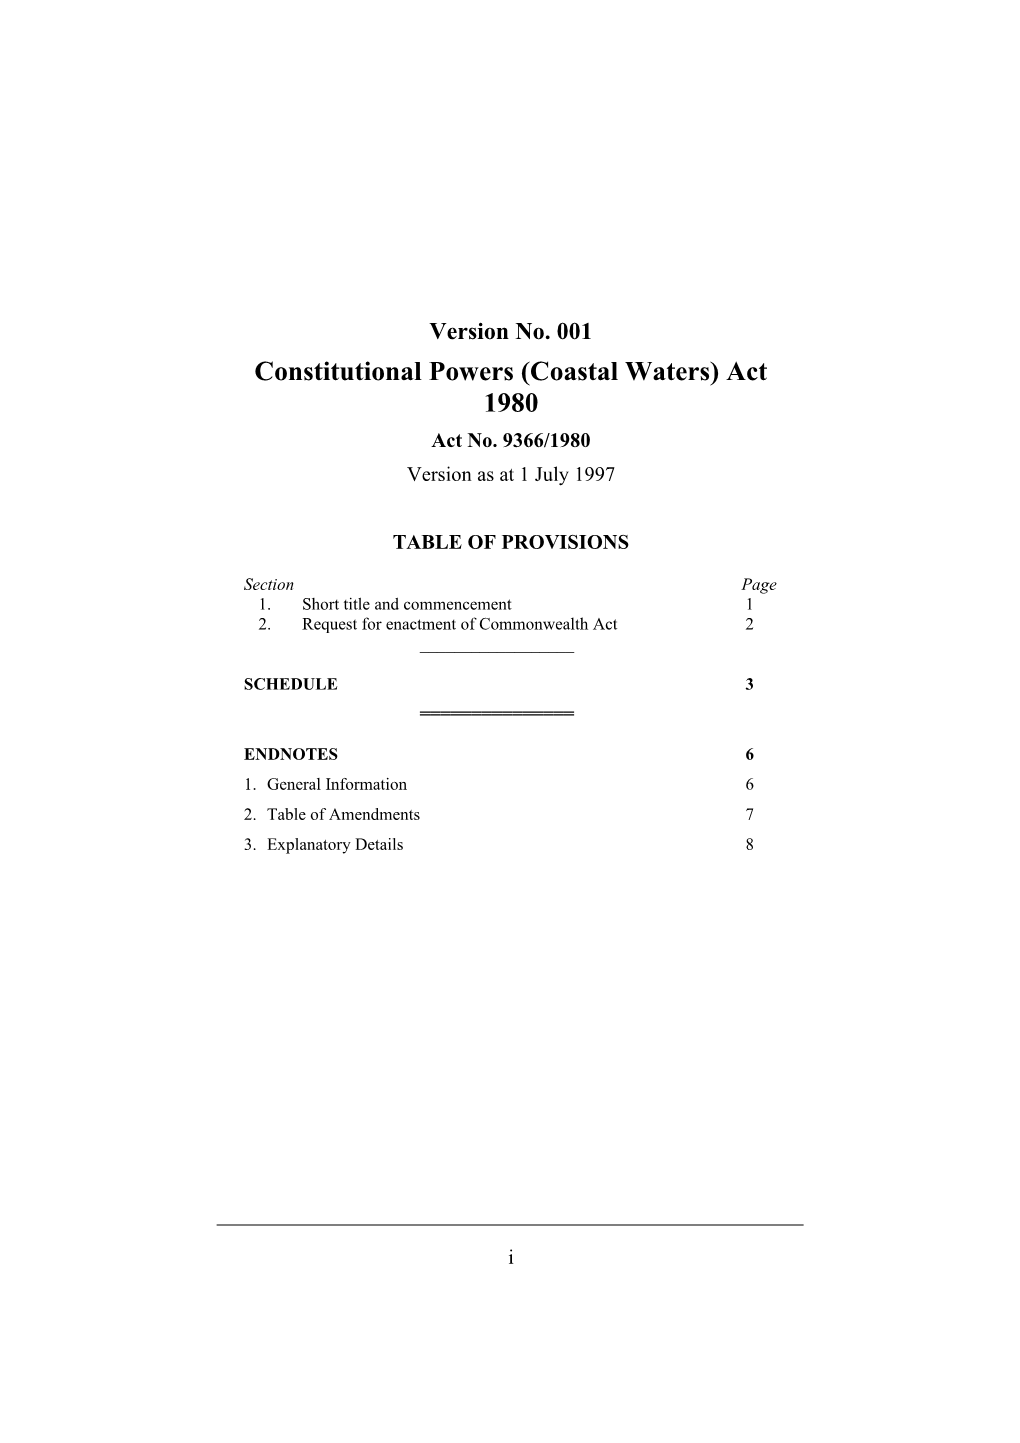 Constitutional Powers (Coastal Waters) Act 1980